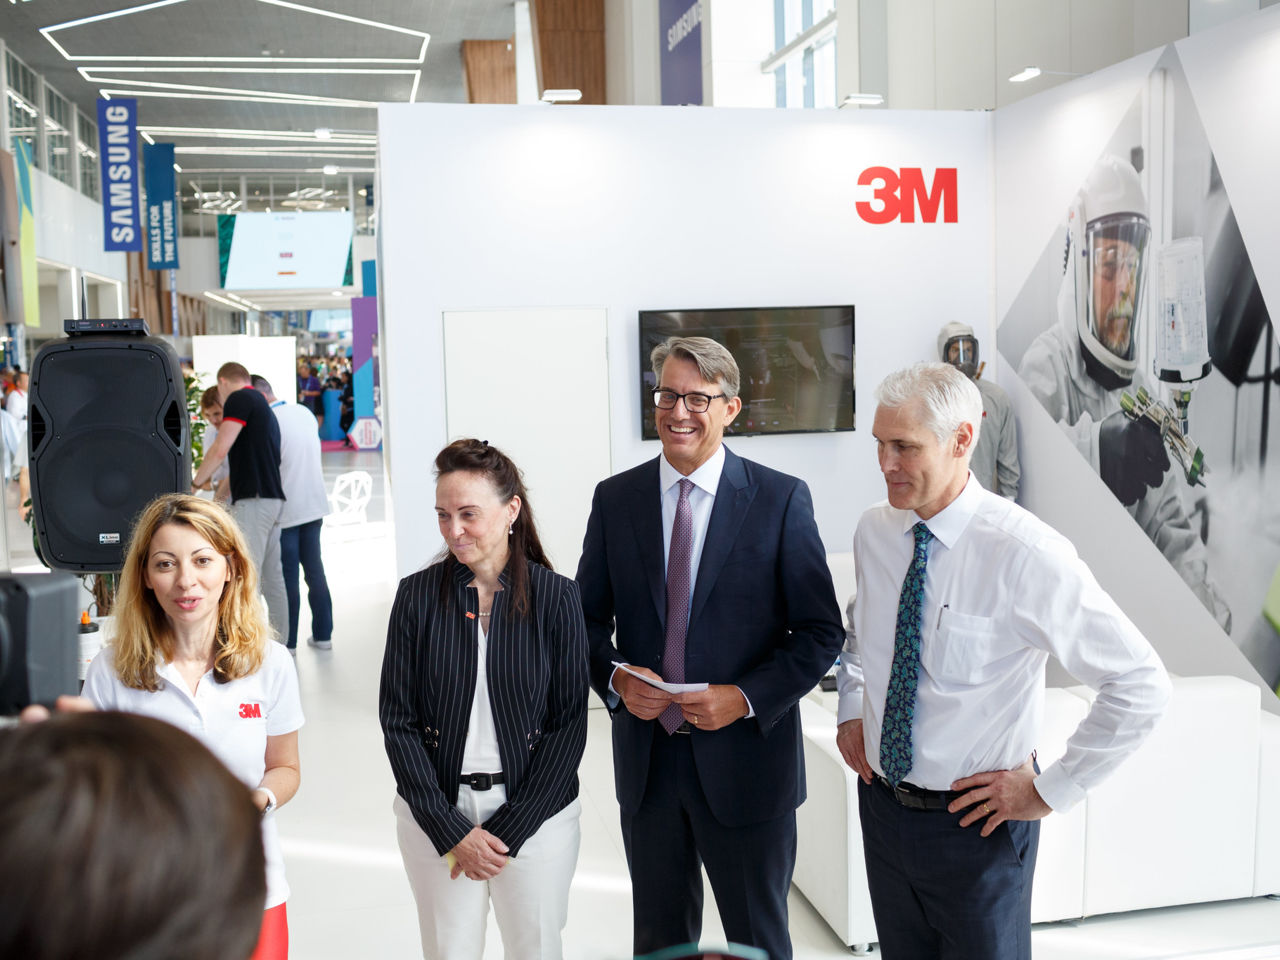 WorldSkills and 3M launch new education project